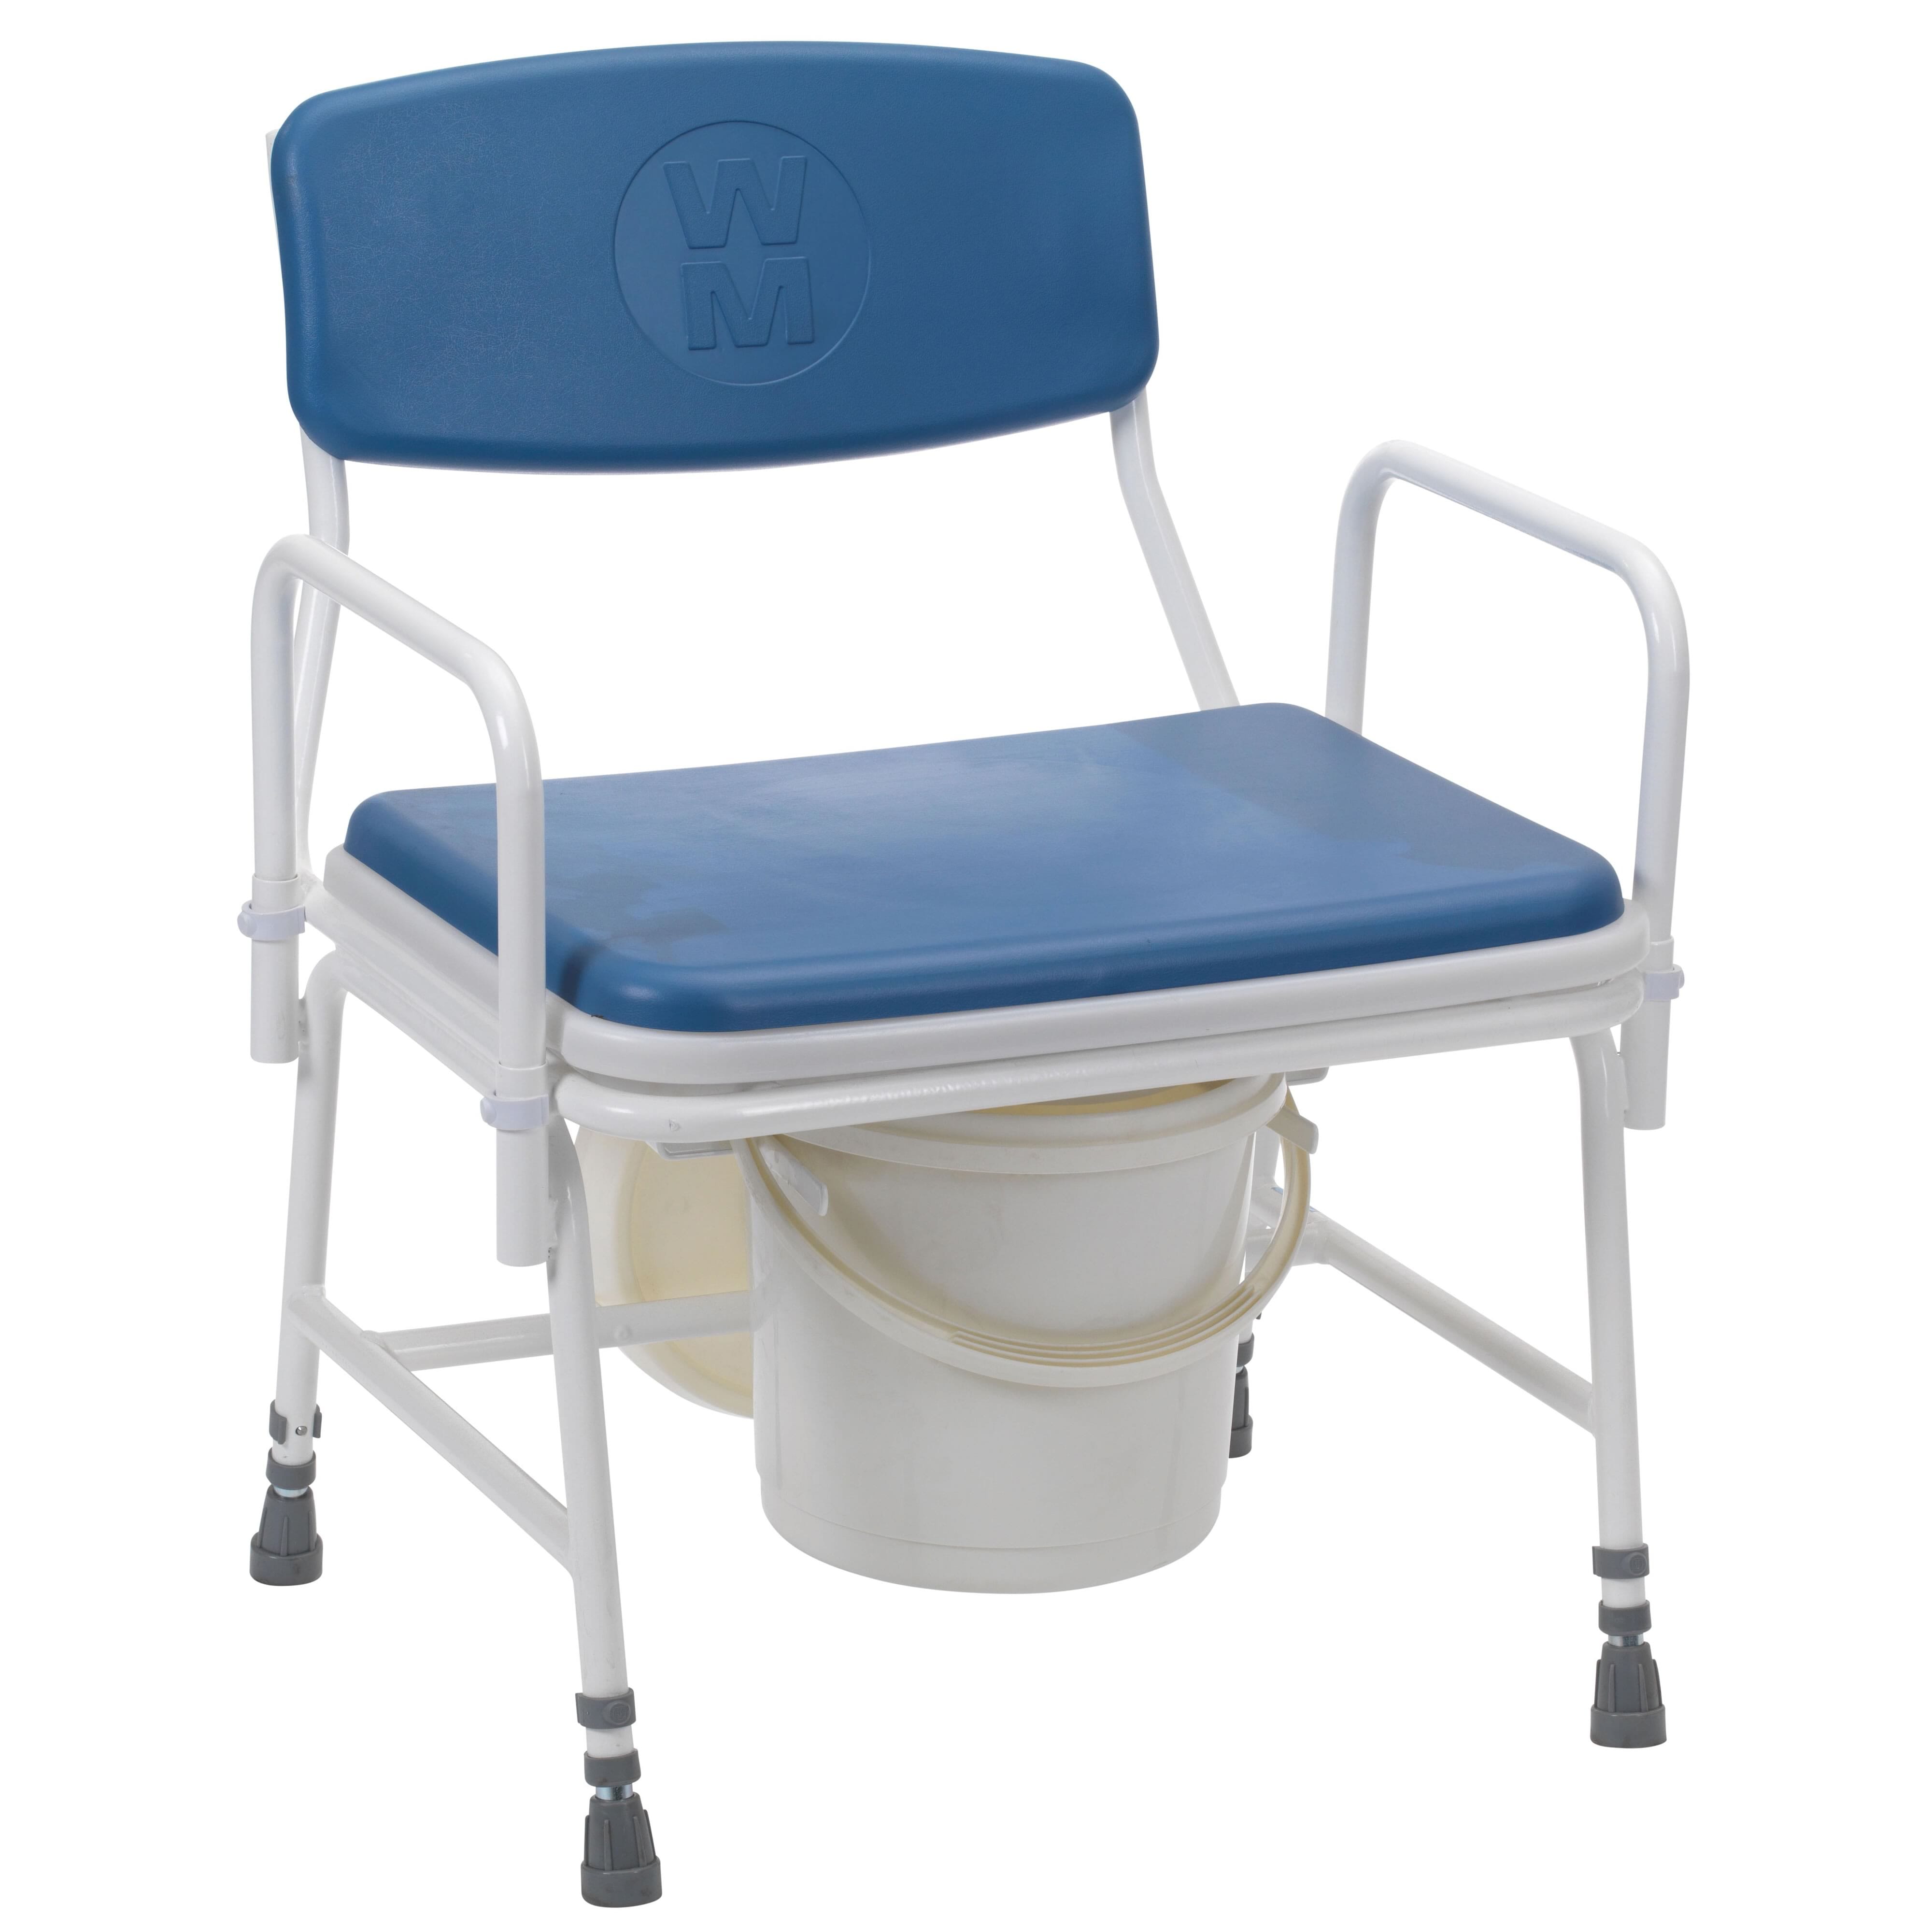 View Belgrave Bariatric Commode information